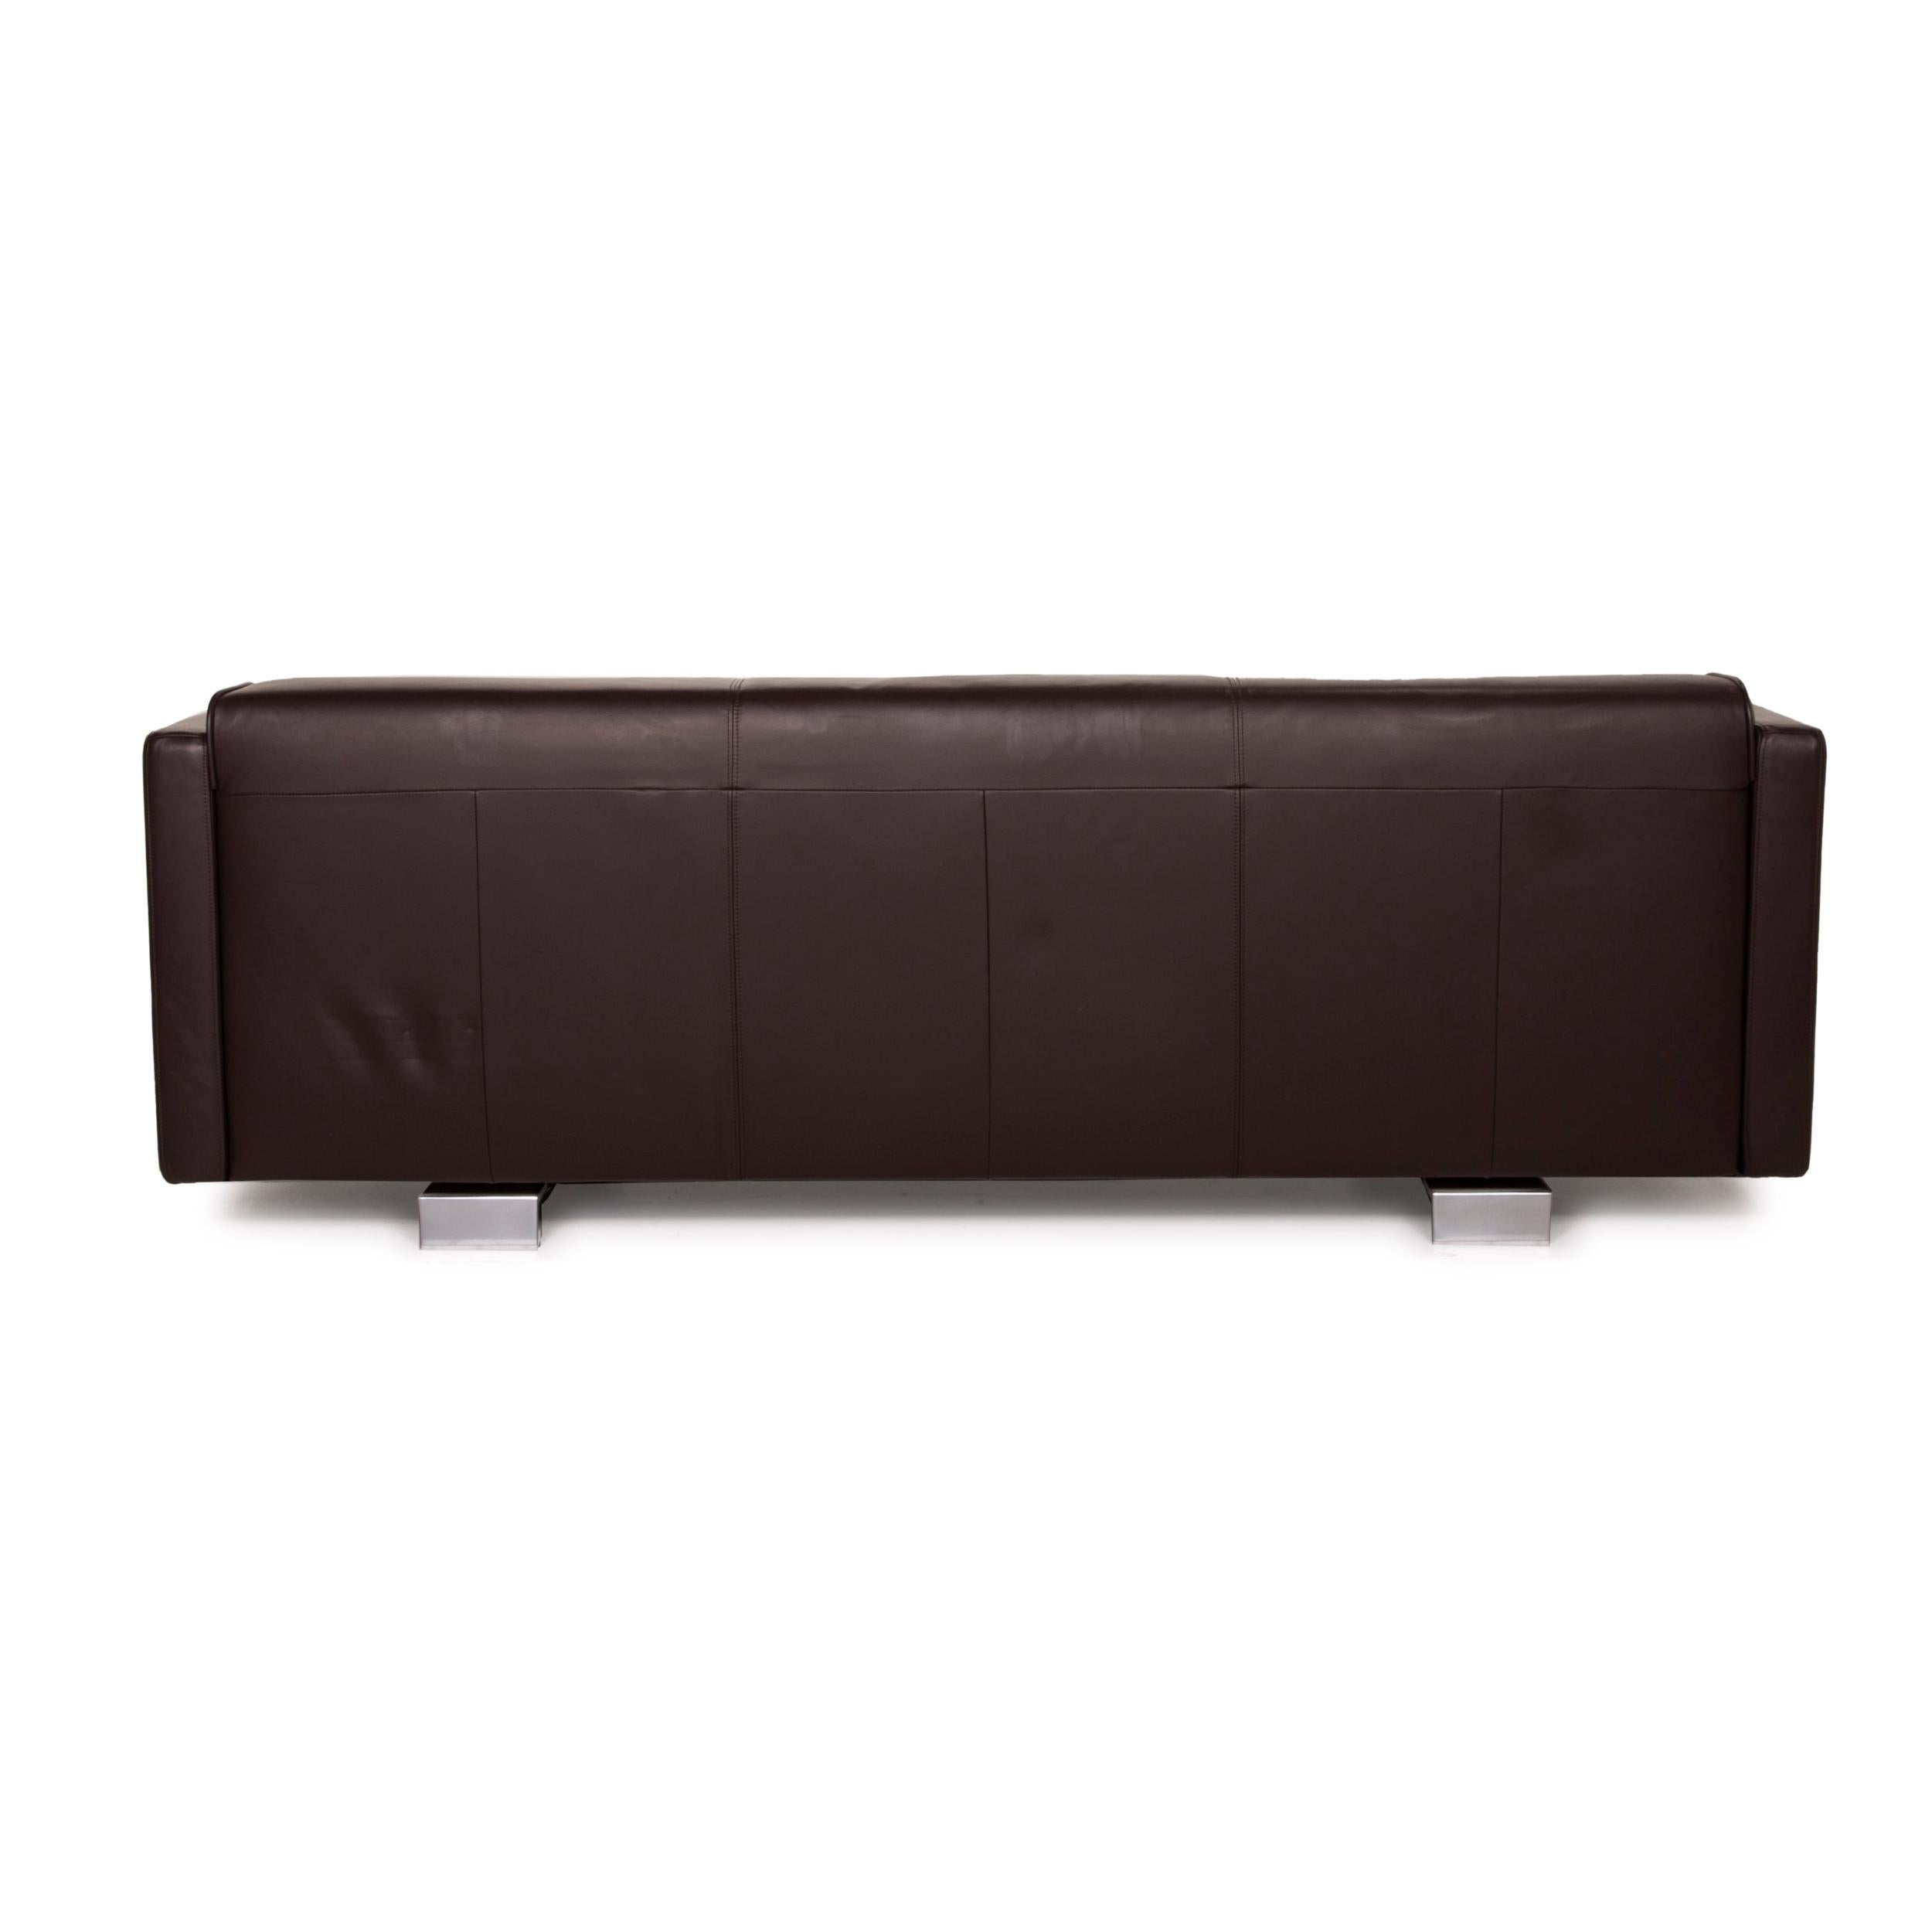 Rolf Benz 6300 Leather Sofa Black Three-Seater For Sale 3